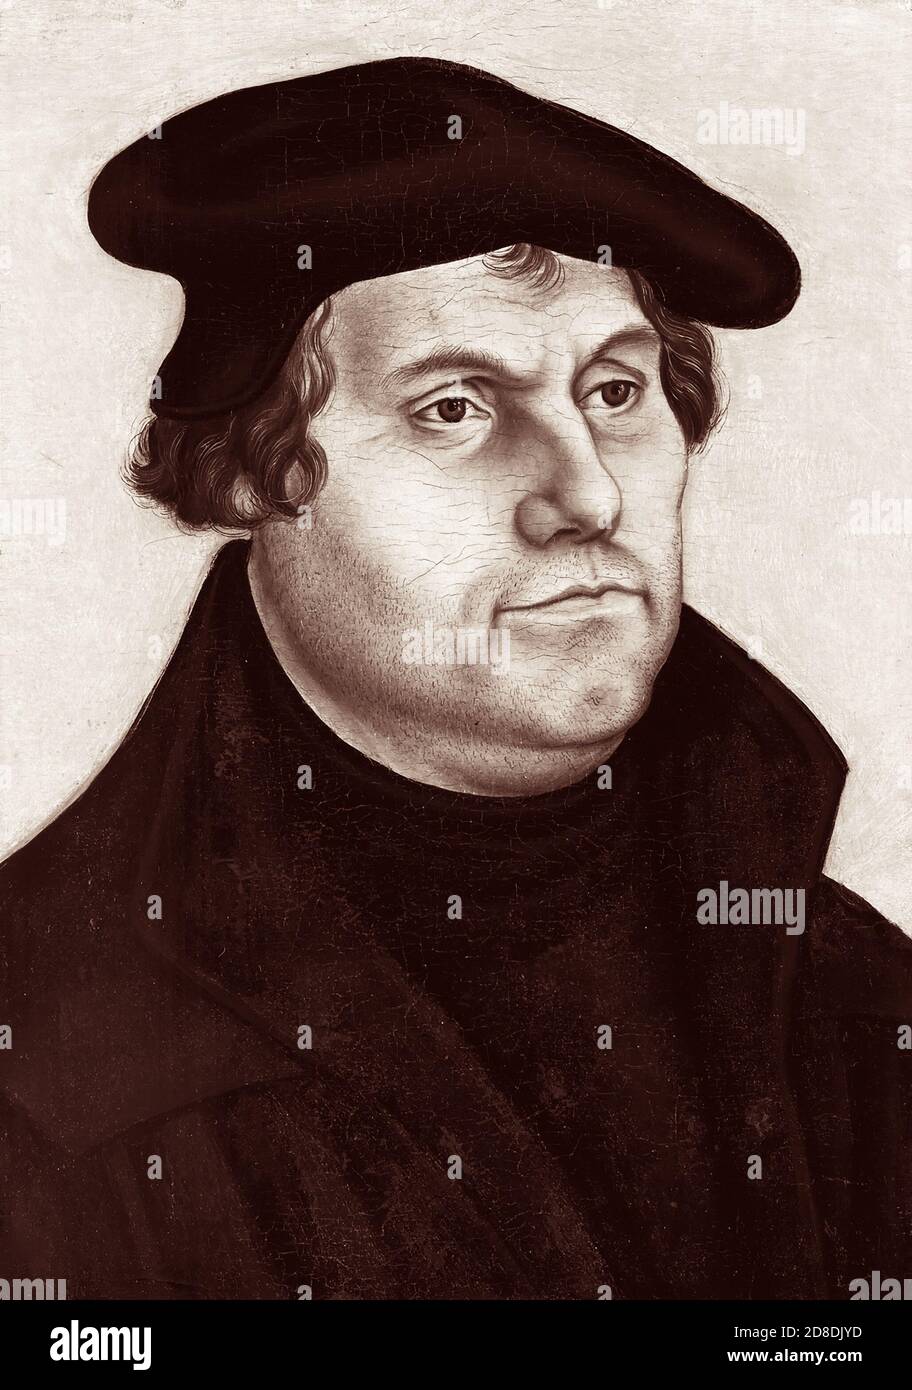 Martin Luther (1483-1546) was a German professor, theologian, and key figure in the Protestant Reformation, as well as a translator of the Bible into the German vernacular. Stock Photo